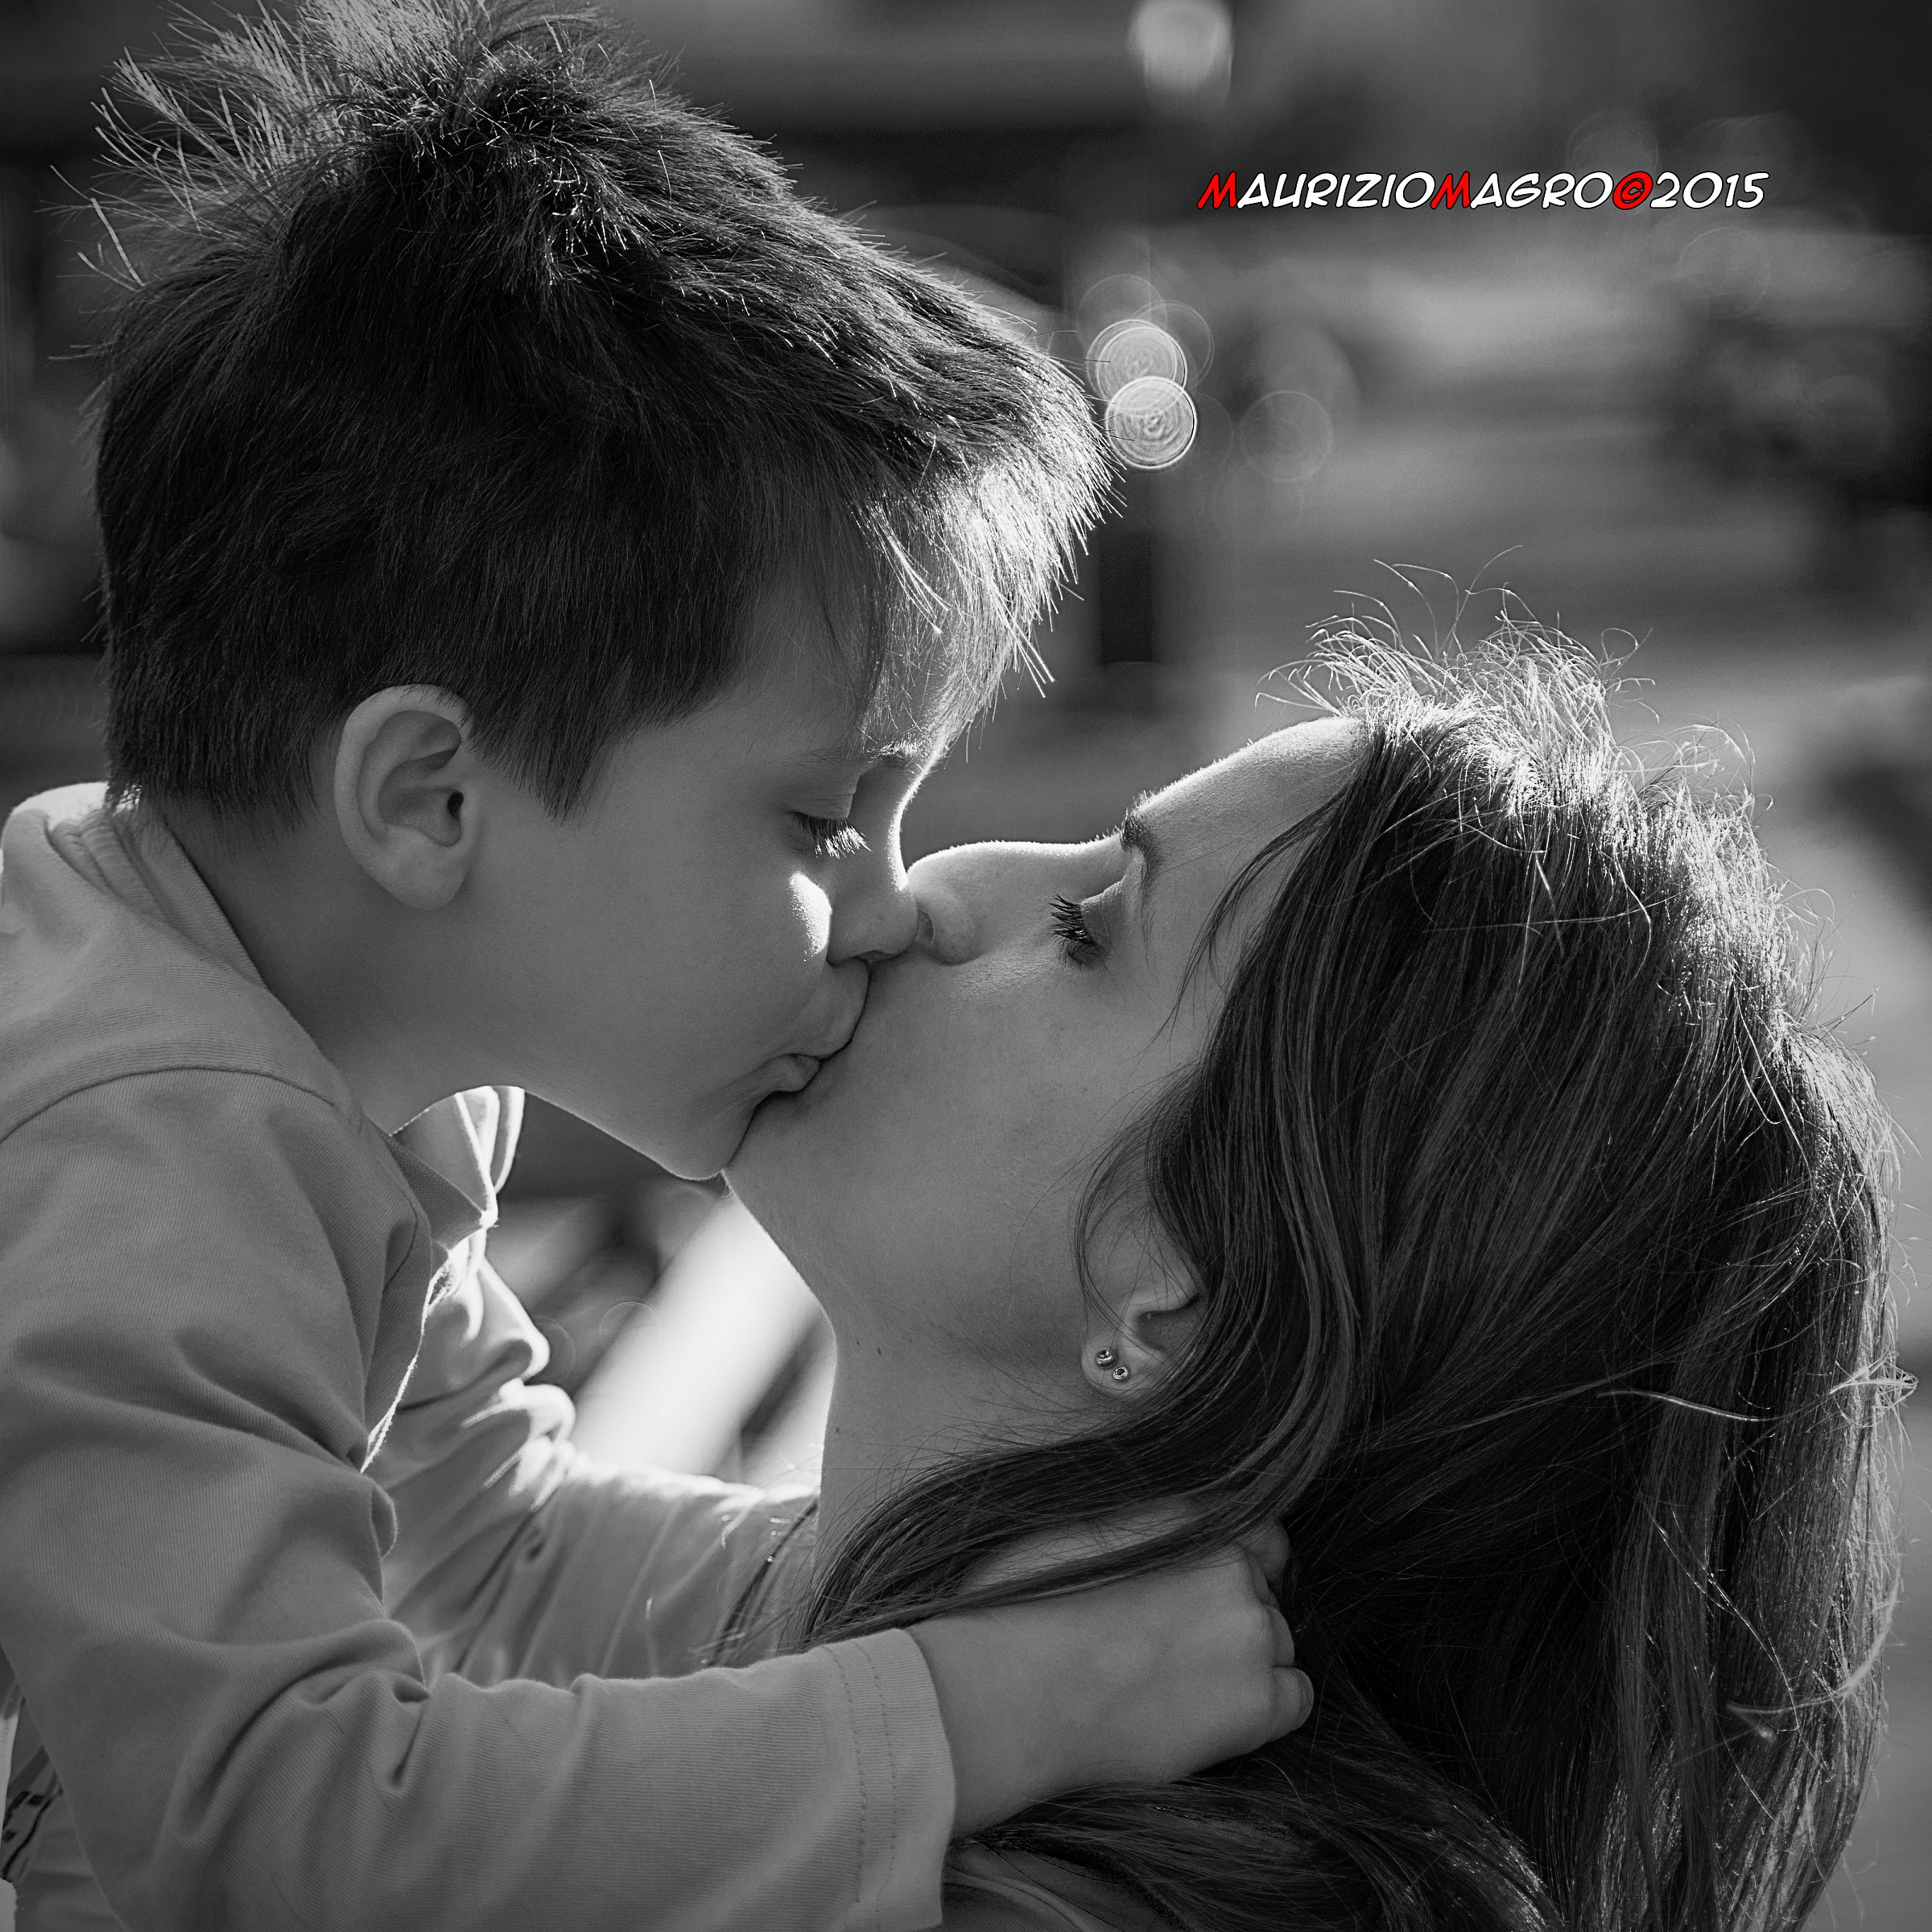 Love between mother and son...